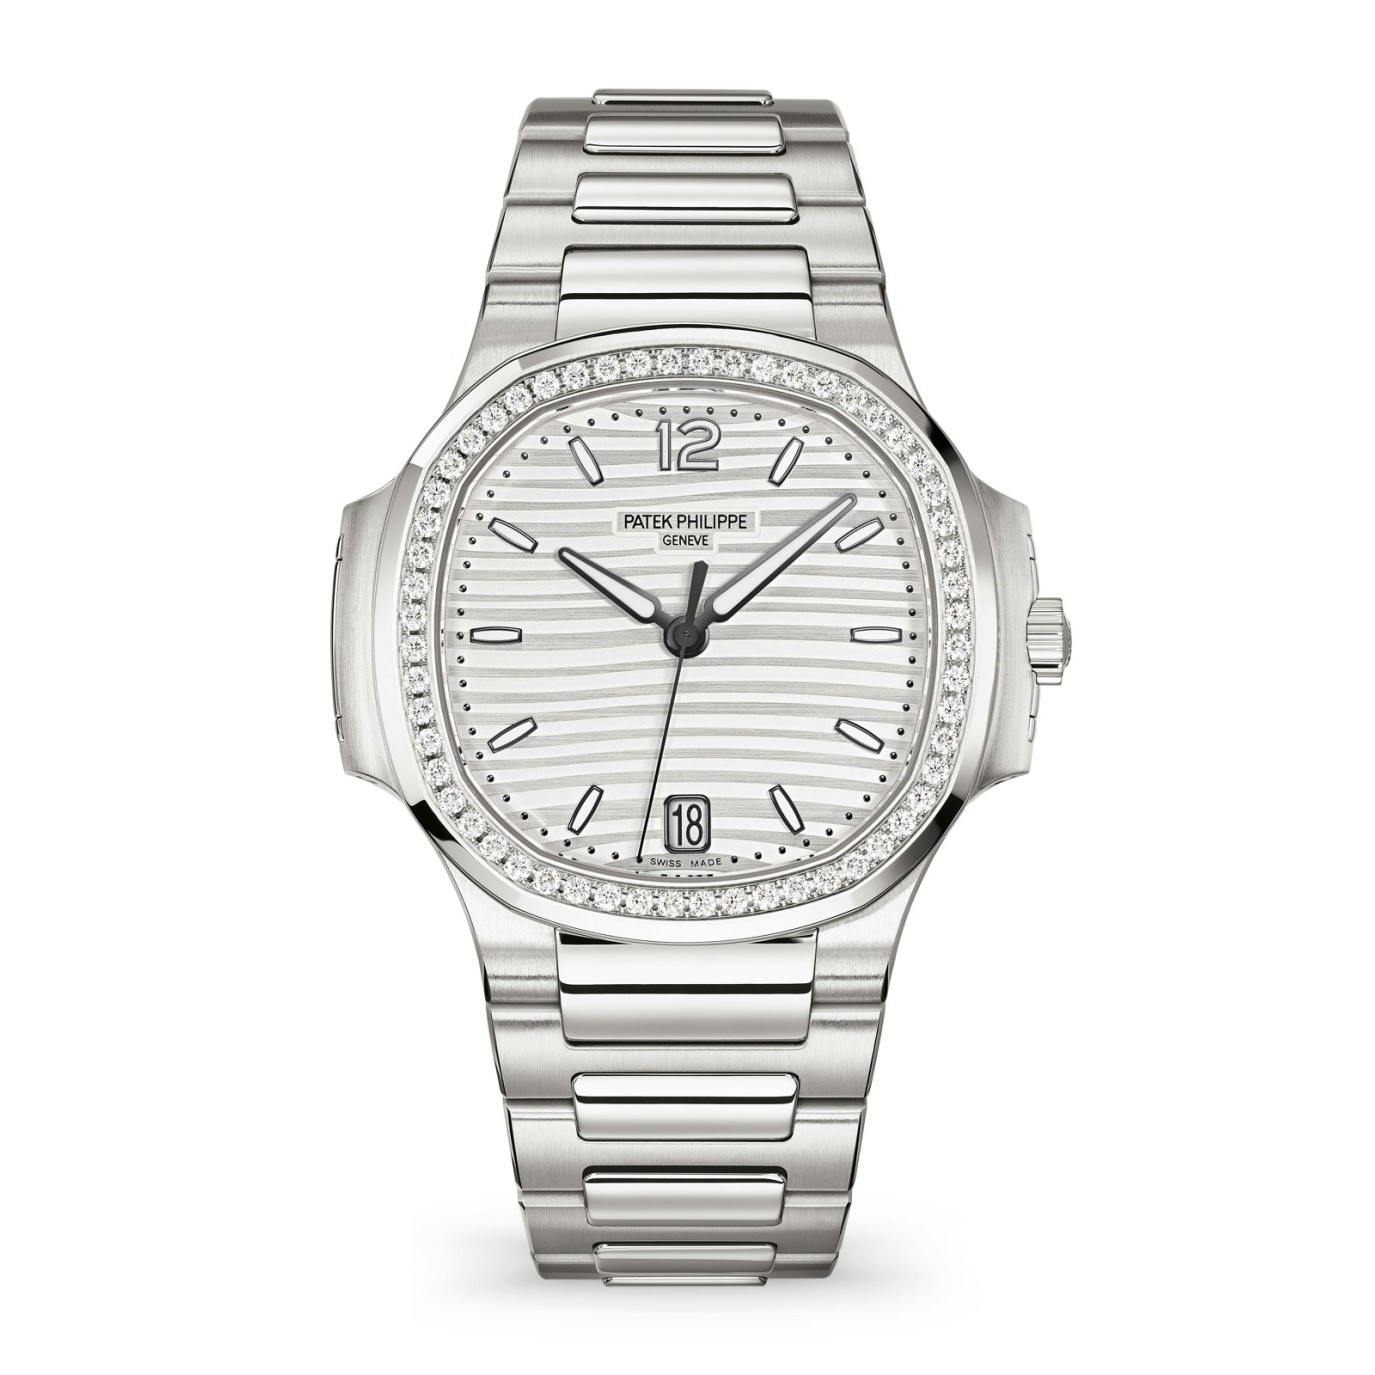 Patek Philippe Nautilus with Silver Dial and Diamonds (7118/1200A)